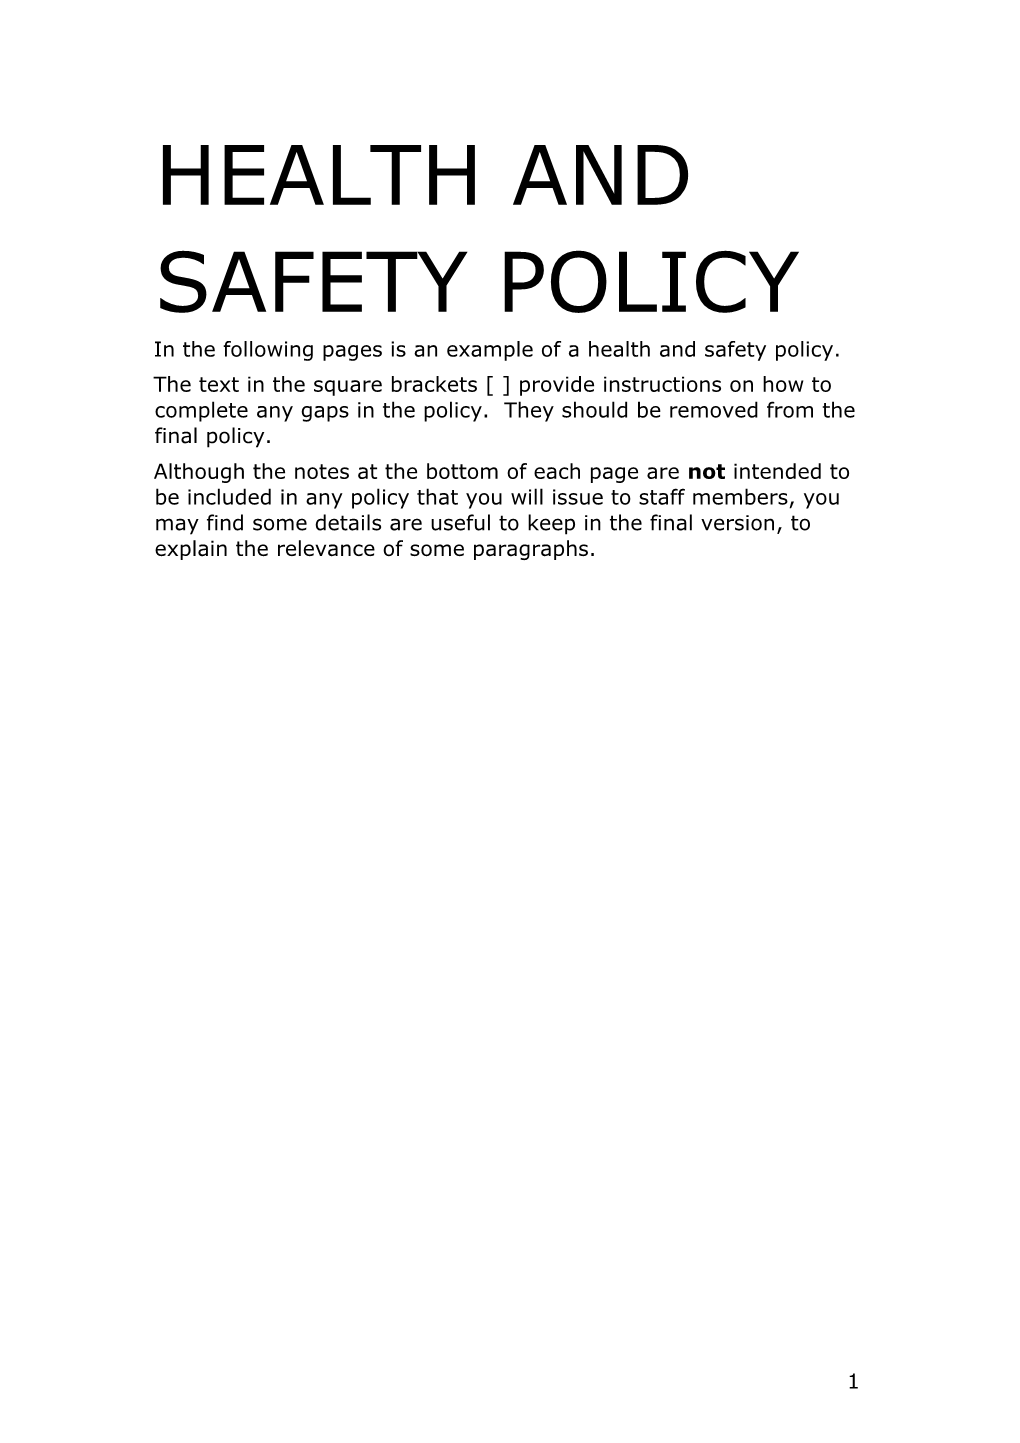 Sample Health and Safety Policy